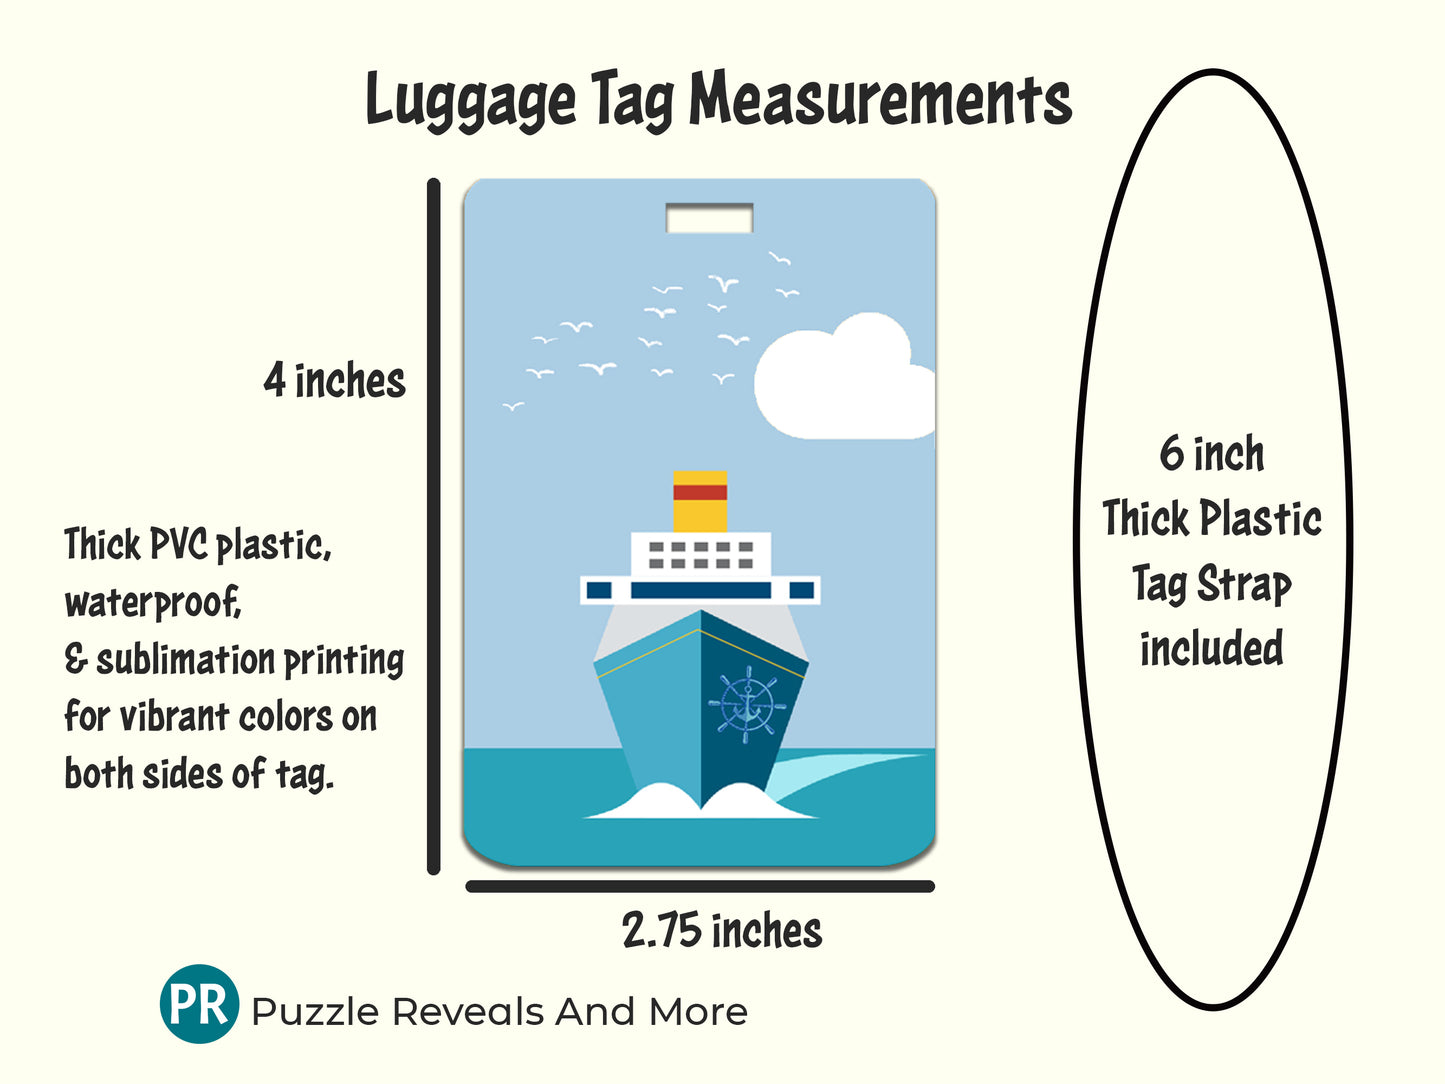 Nautical Luggage Tag for Going on a Cruise Ship!  Personalized, Waterproof Travel Accessory with Multiple Tag Discounts!